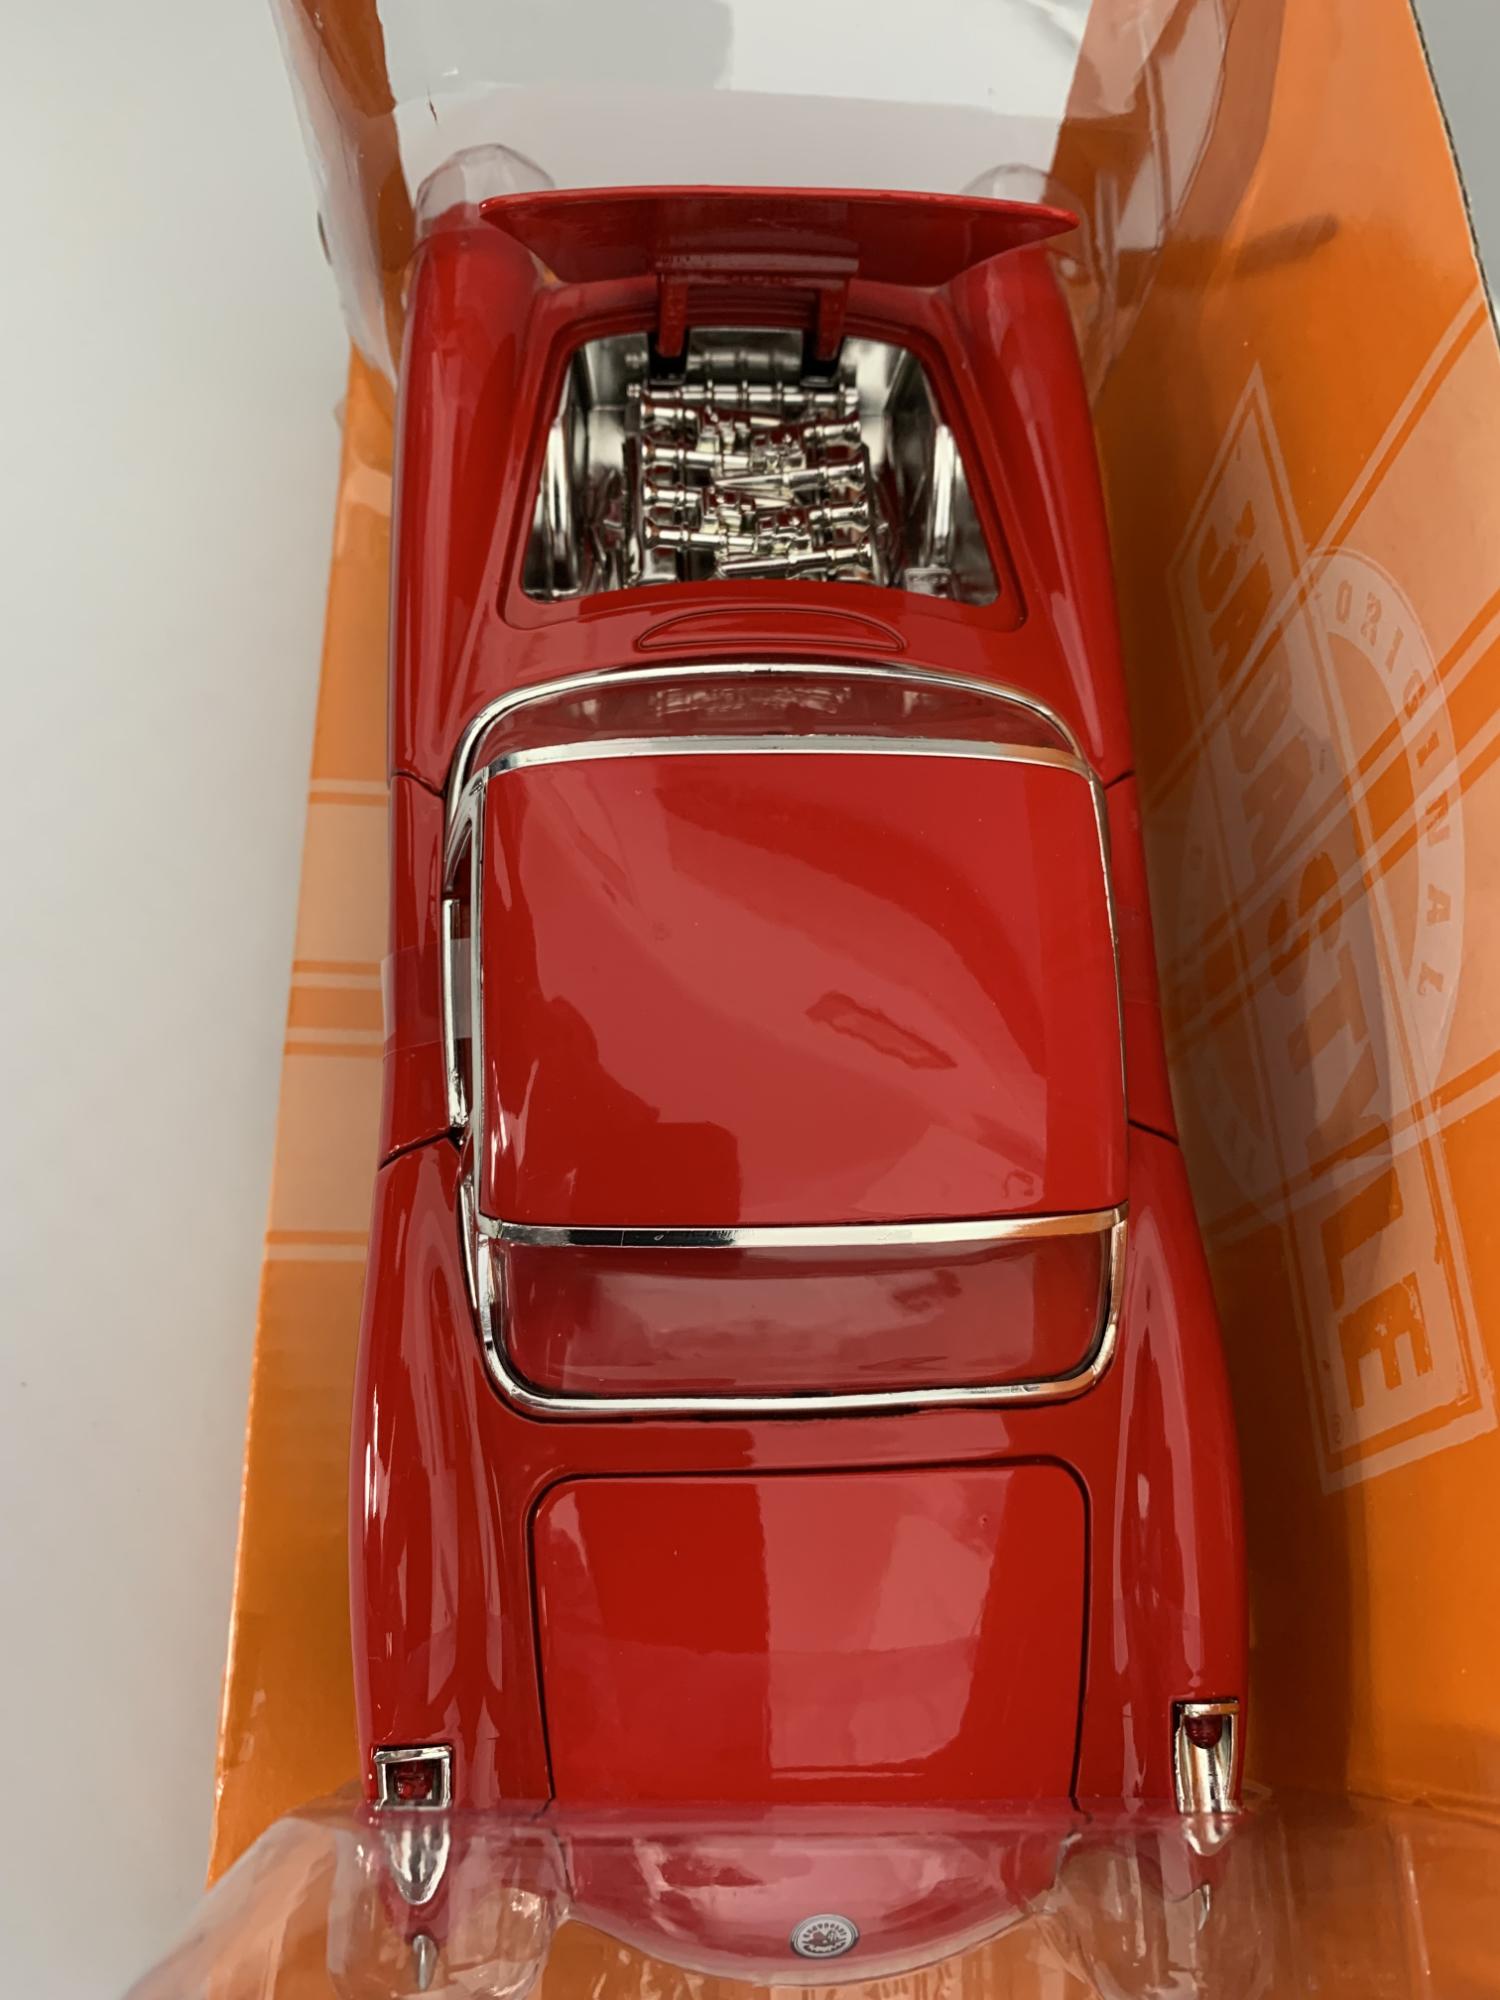 excellent scale model of a Chevy Corvette decorated in red and white with chrome wheels.